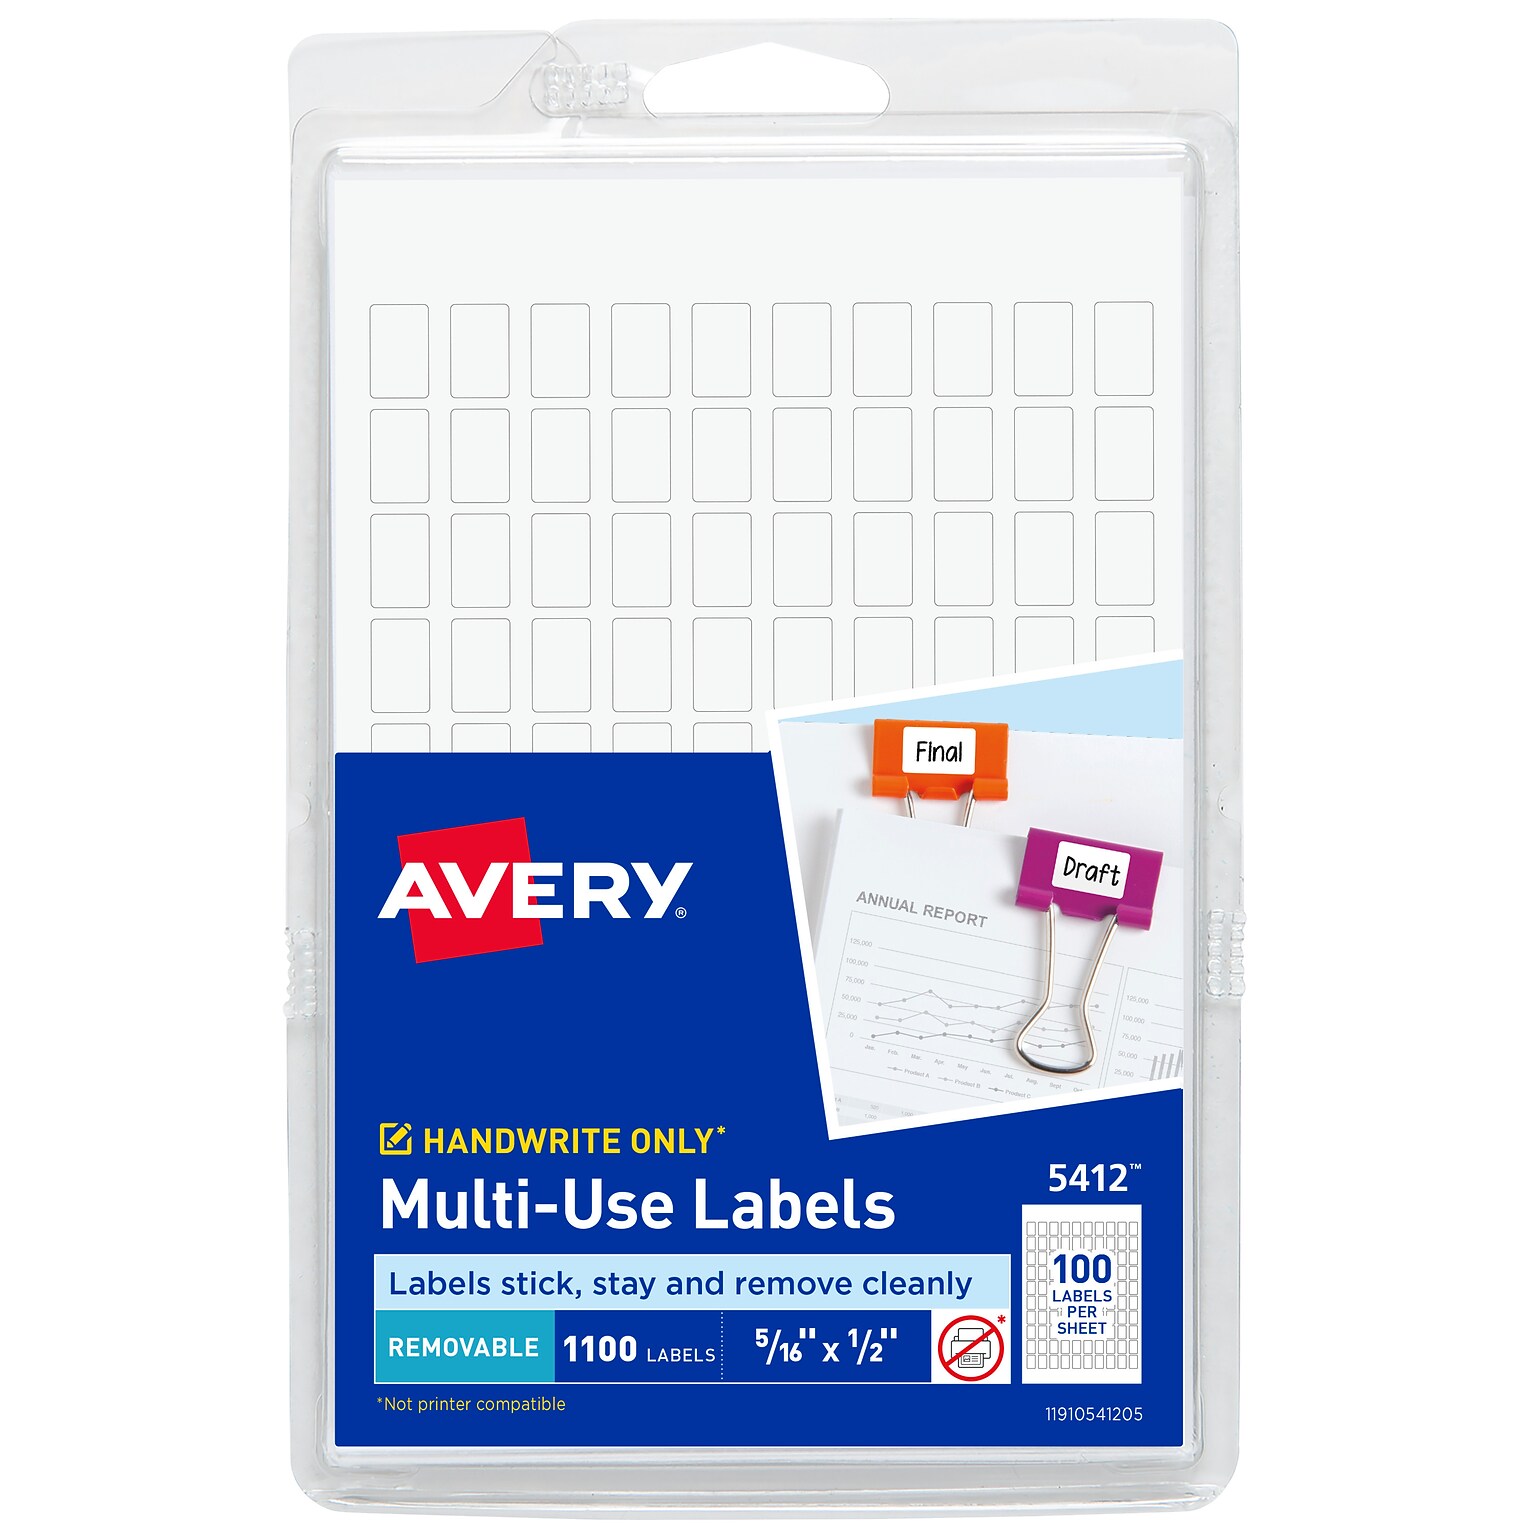 Avery Removable Hand Written Multipurpose Labels, 5/16 x 1/2, White, 100 Labels/Sheet, 11 Sheets/Pack, 1100 Labels/Pack (5412)